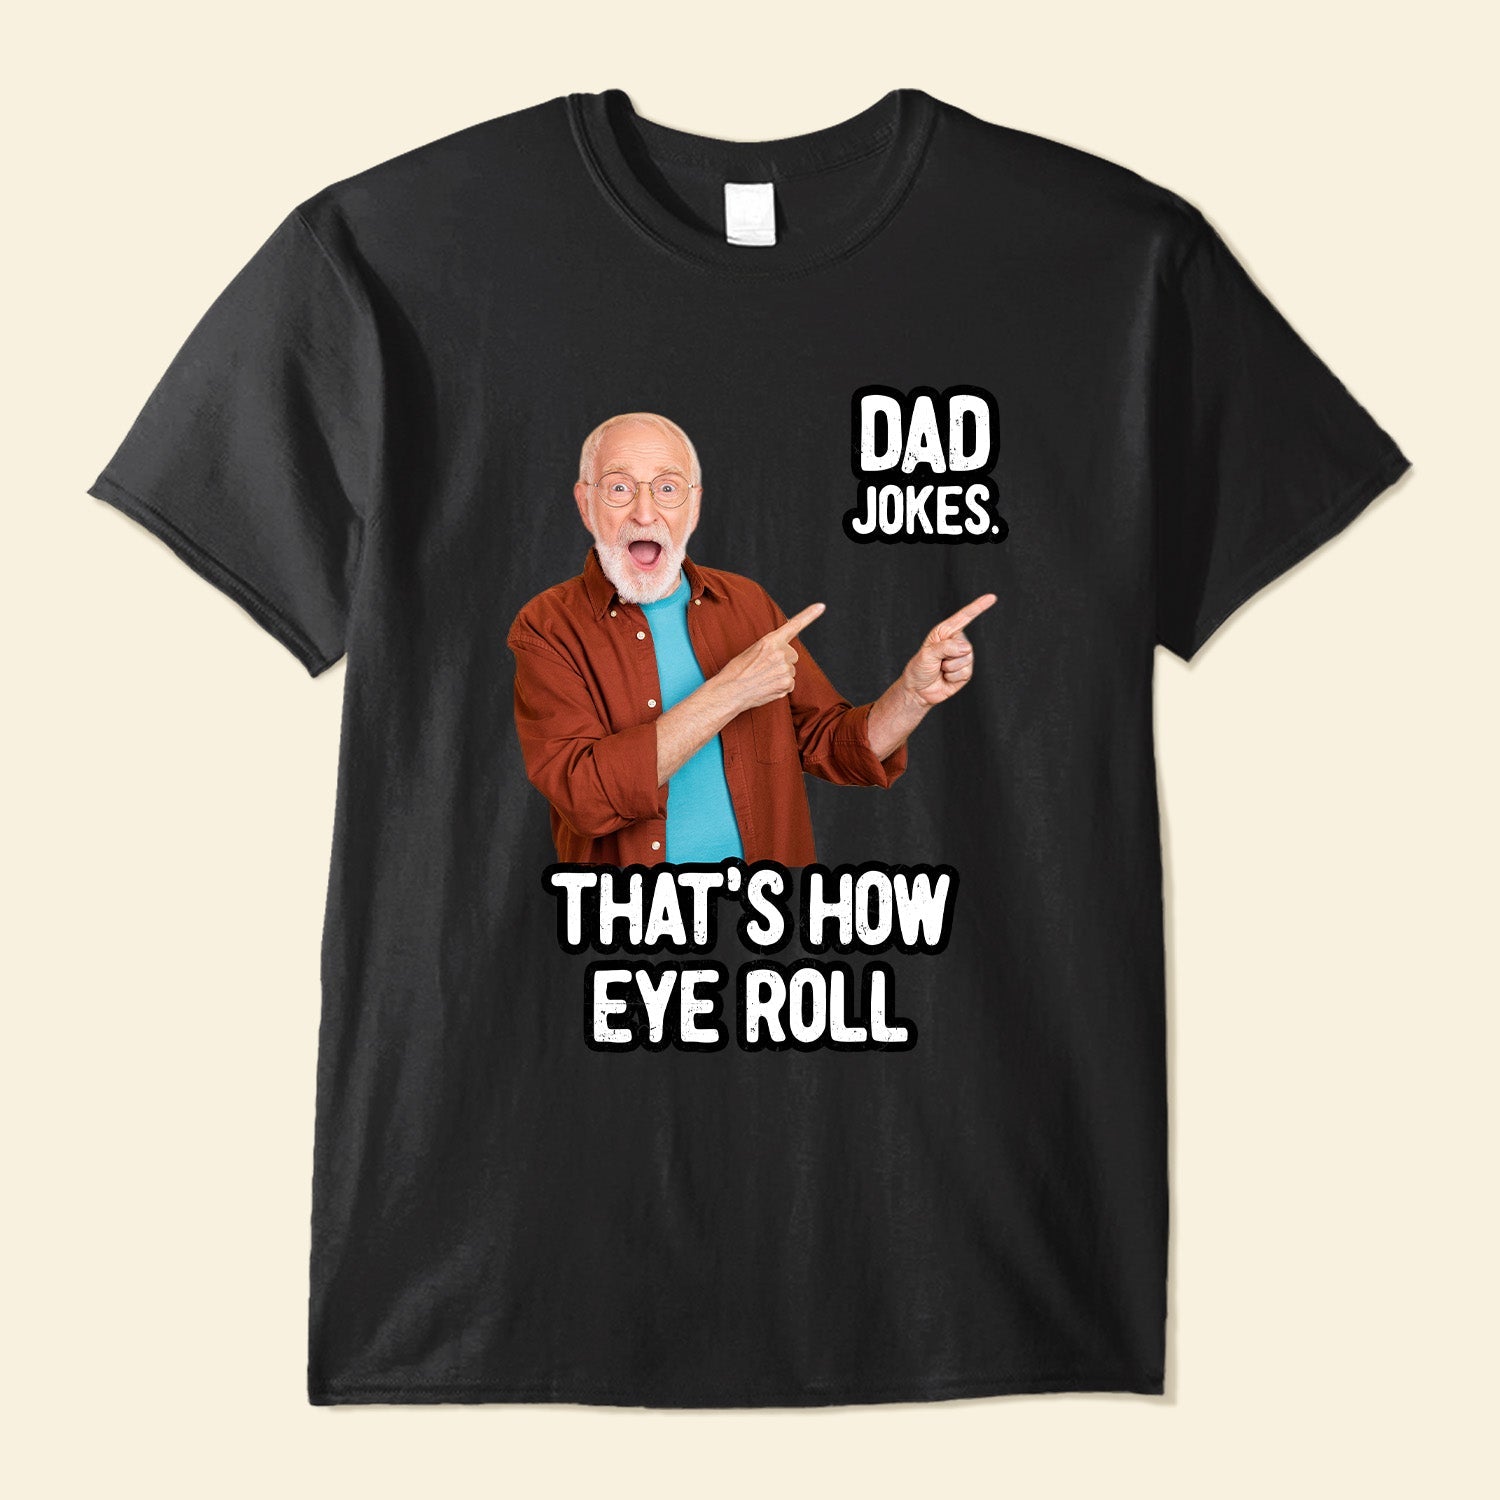 Dad Jokes That's How Eye Roll T-shirt, Funny Gift for Dad